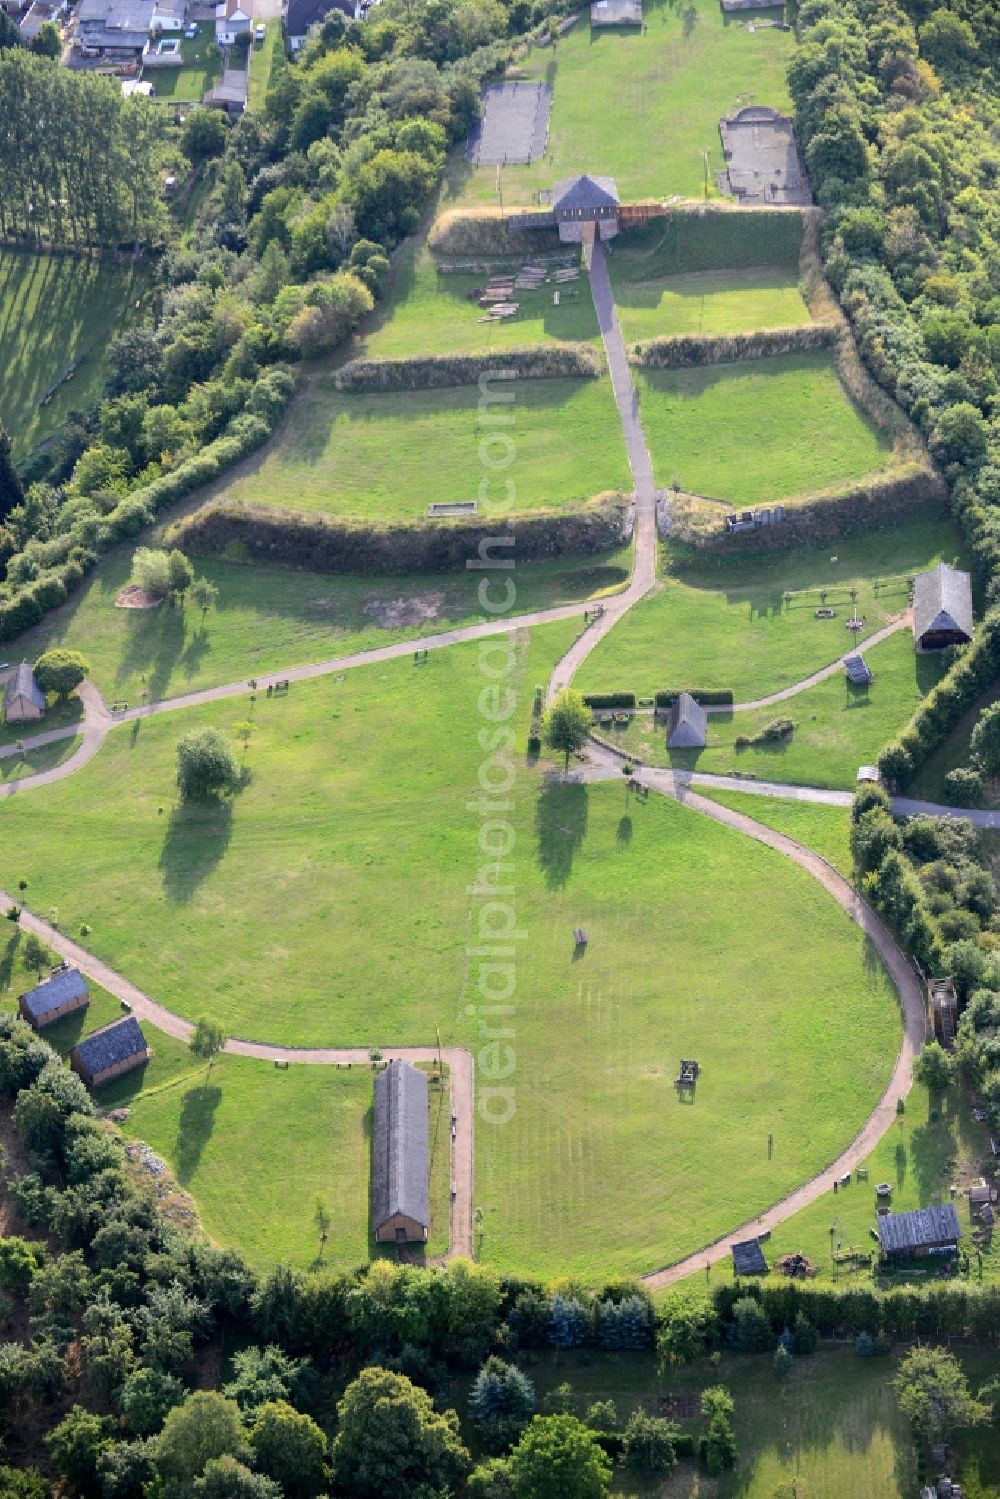 Aerial image Tilleda - Open air museum of the Koenigspfalz castle in Tilleda on Kyffhaeuser in the state of Saxony-Anhalt. The castle with its whole compound is the only completely excavated Pfalz in Germany and a station of the Street of the Romanesque